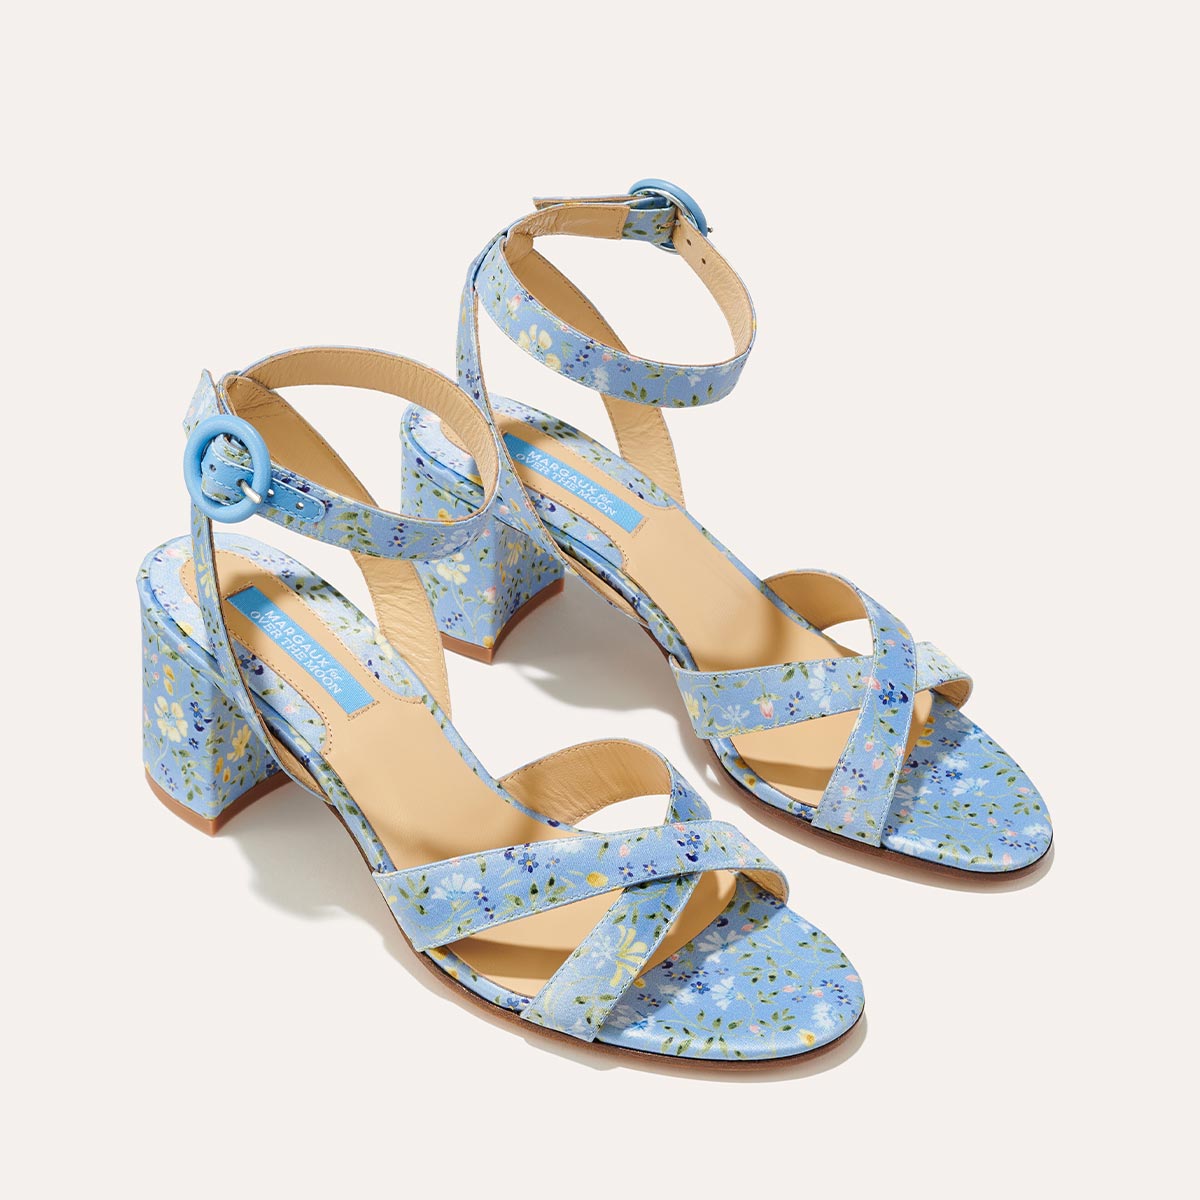 OTM Exclusive: The City Sandal in Riley Sheehey Blue Floral Satin